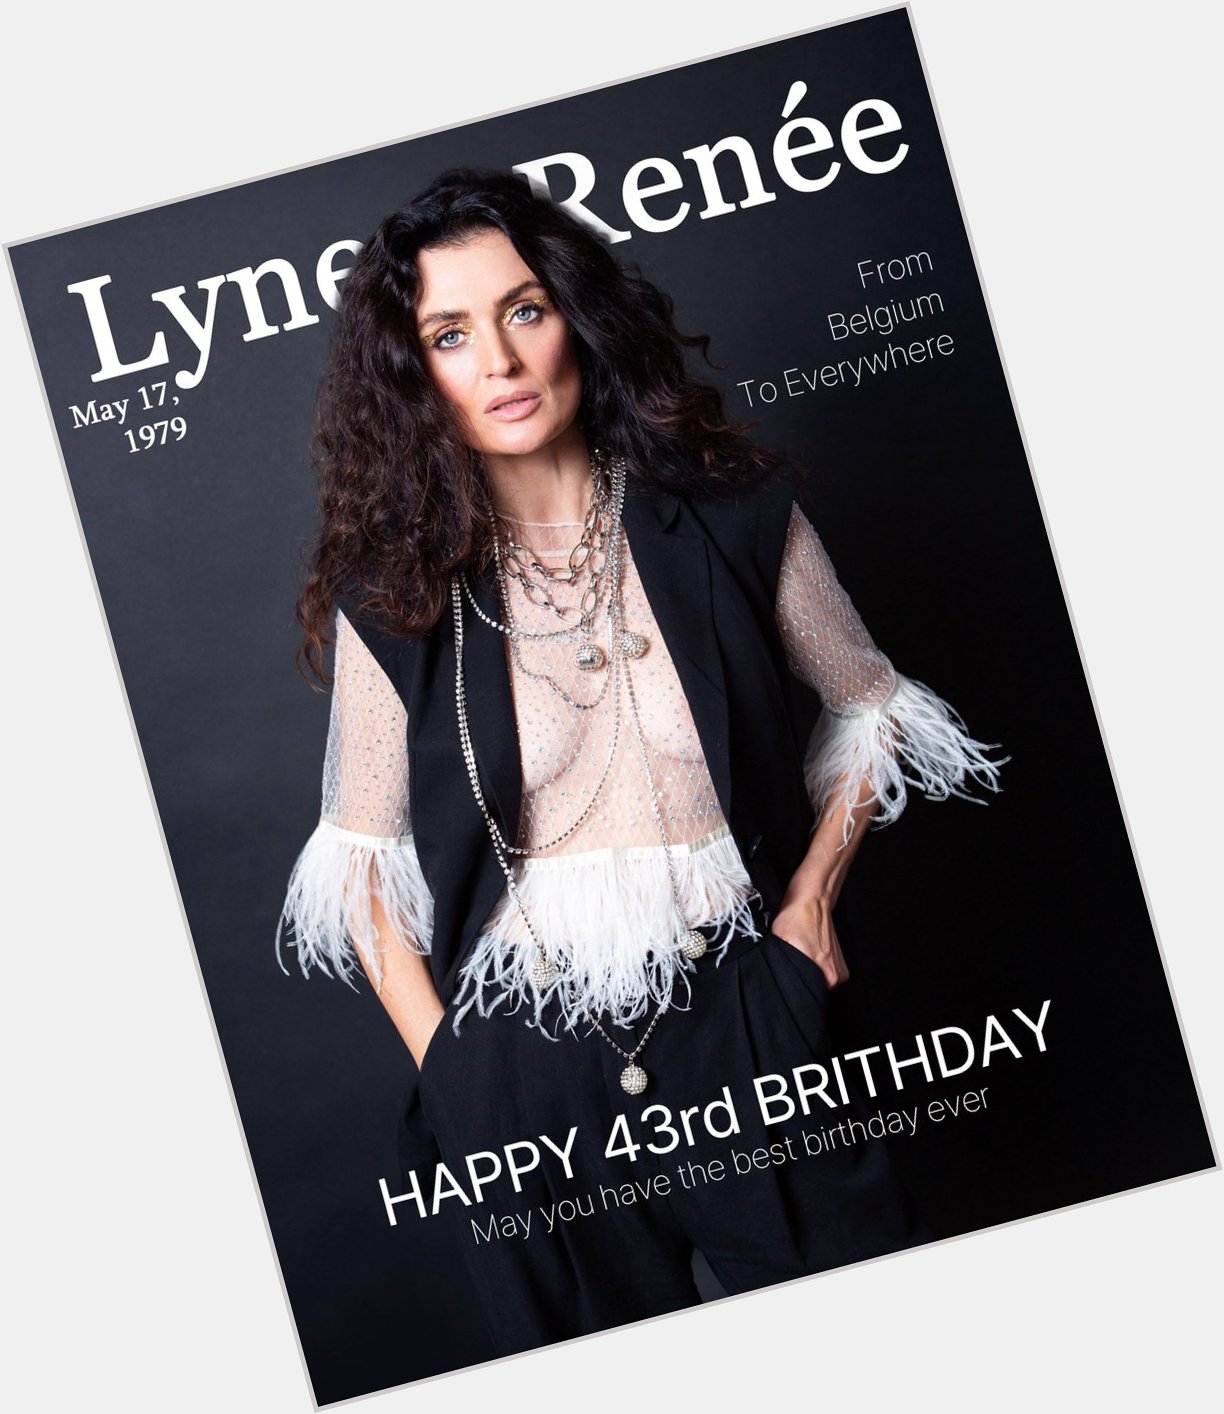 Happy birthday Lyne Renée, the most amazing woman in the world!         